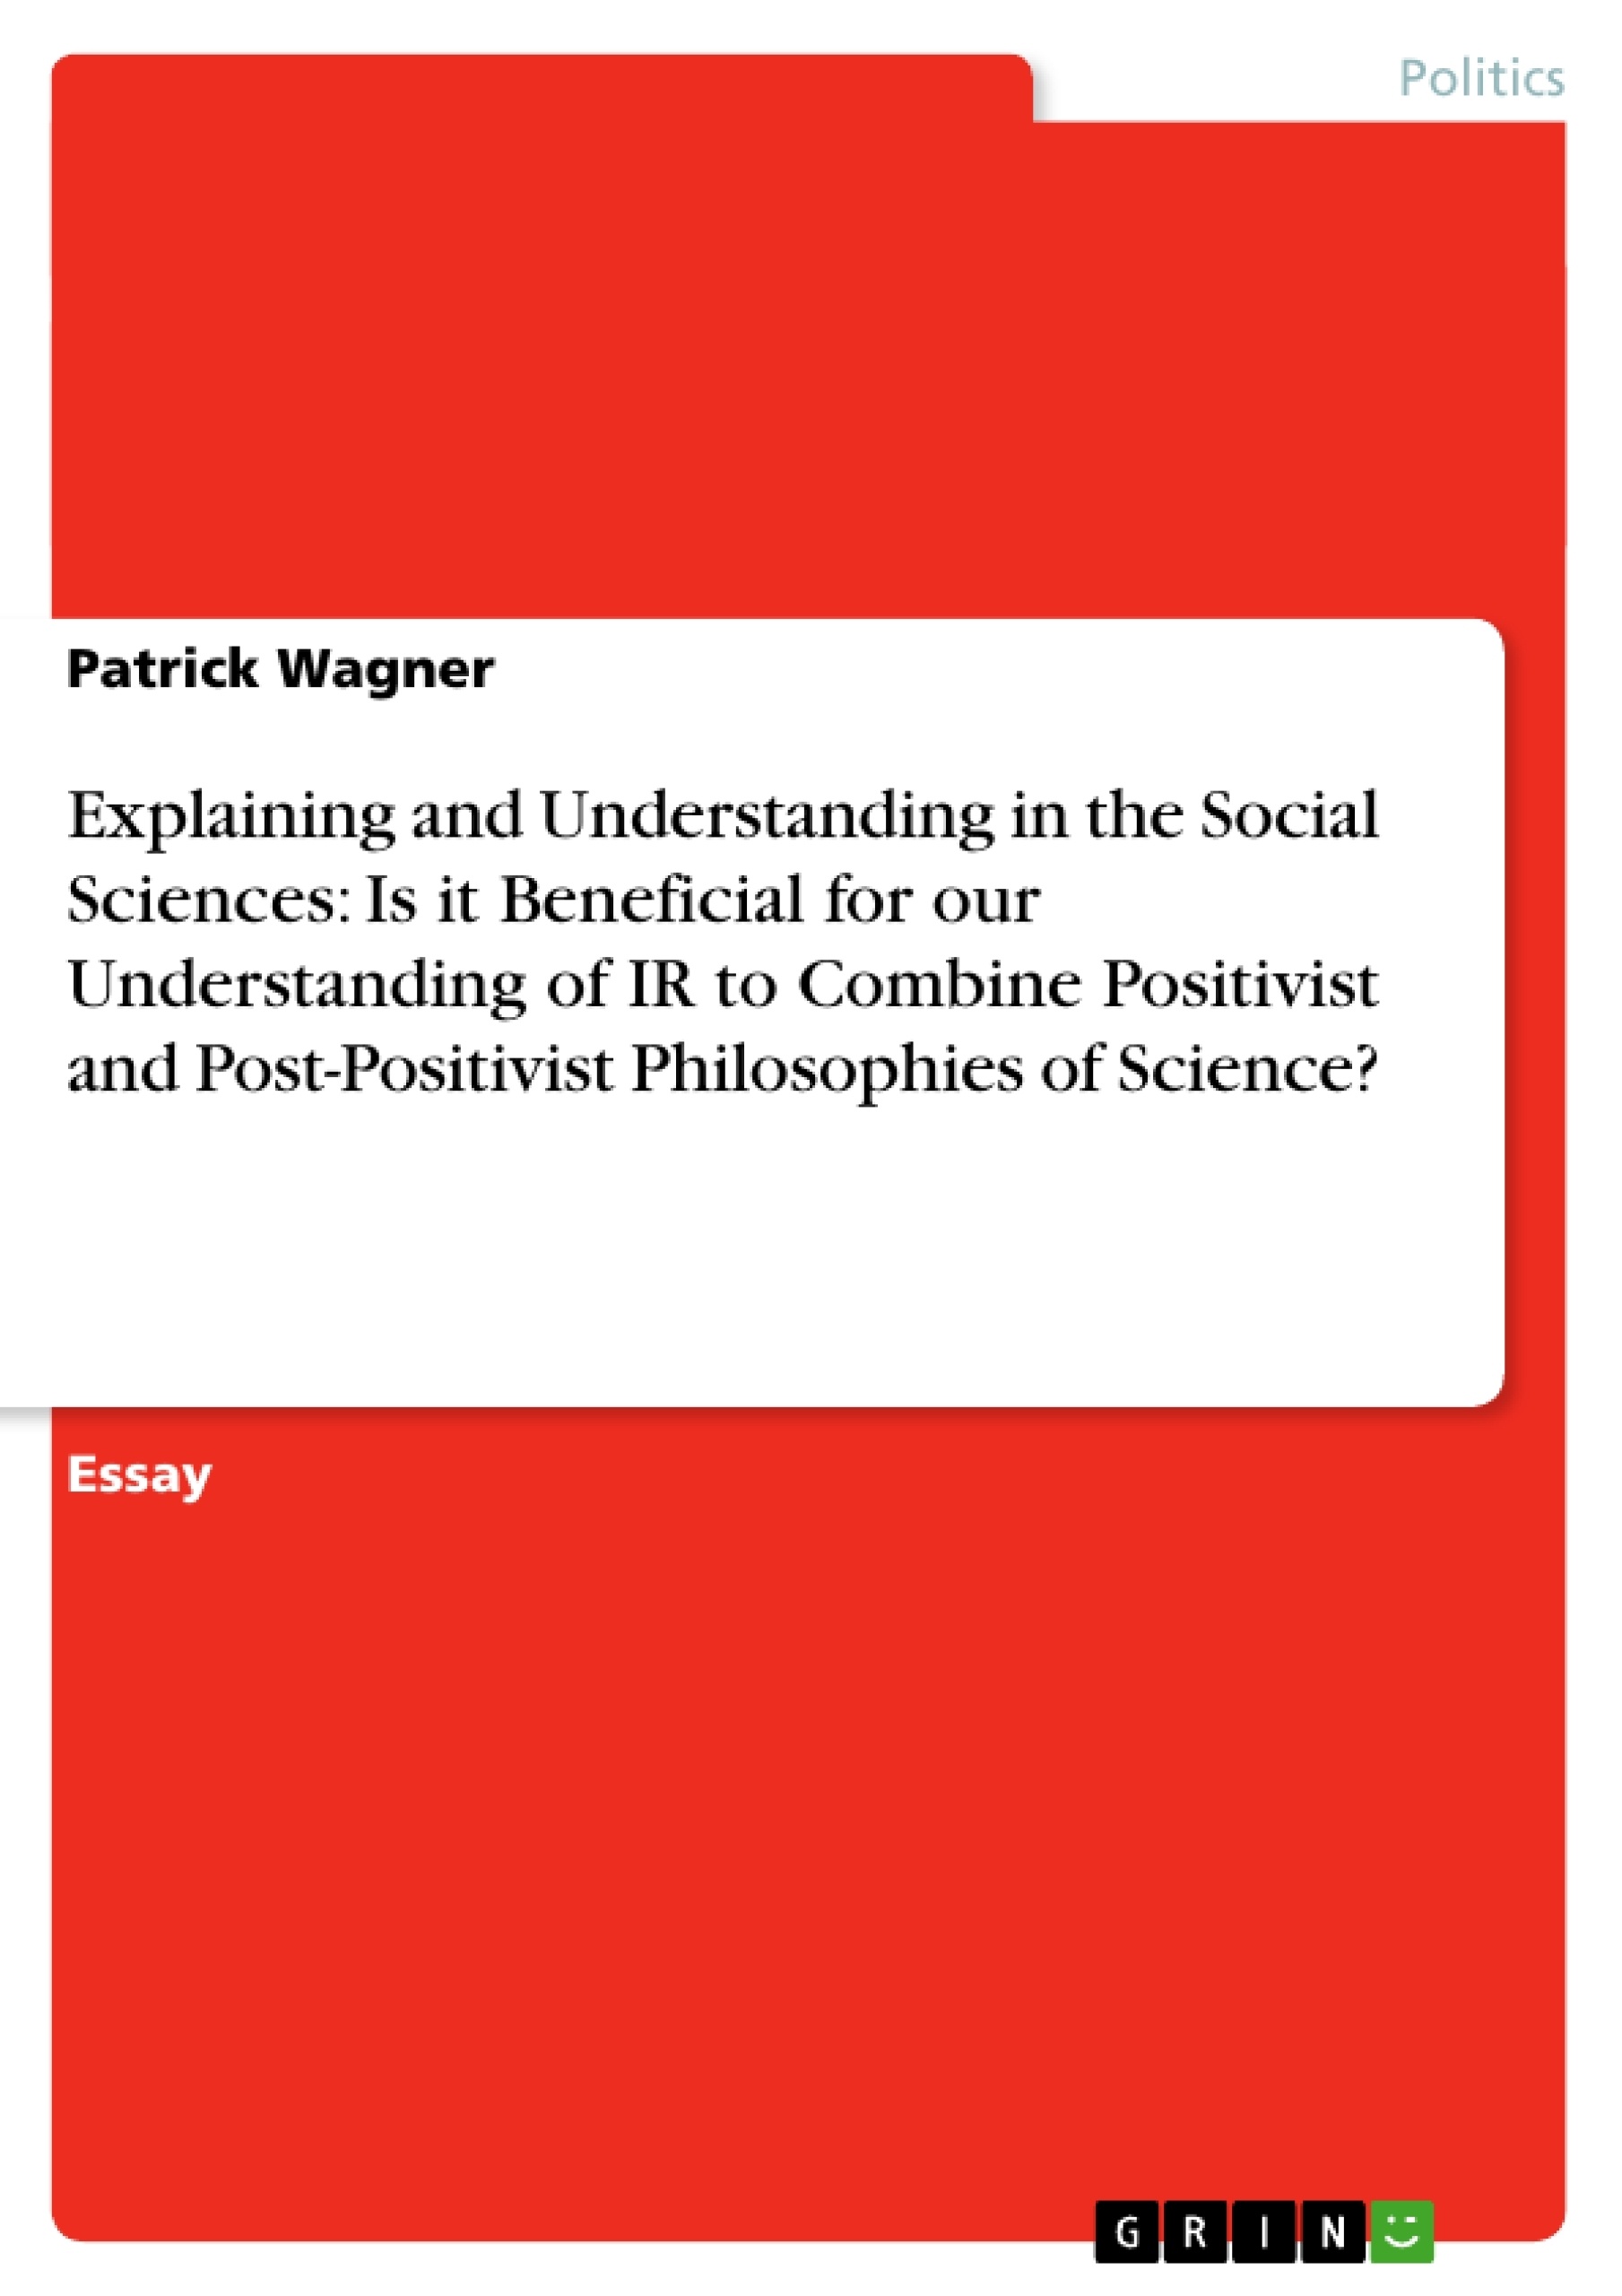 Title: Explaining and Understanding in the Social Sciences: Is it Beneficial for our Understanding of IR to Combine Positivist and Post-Positivist Philosophies of Science?